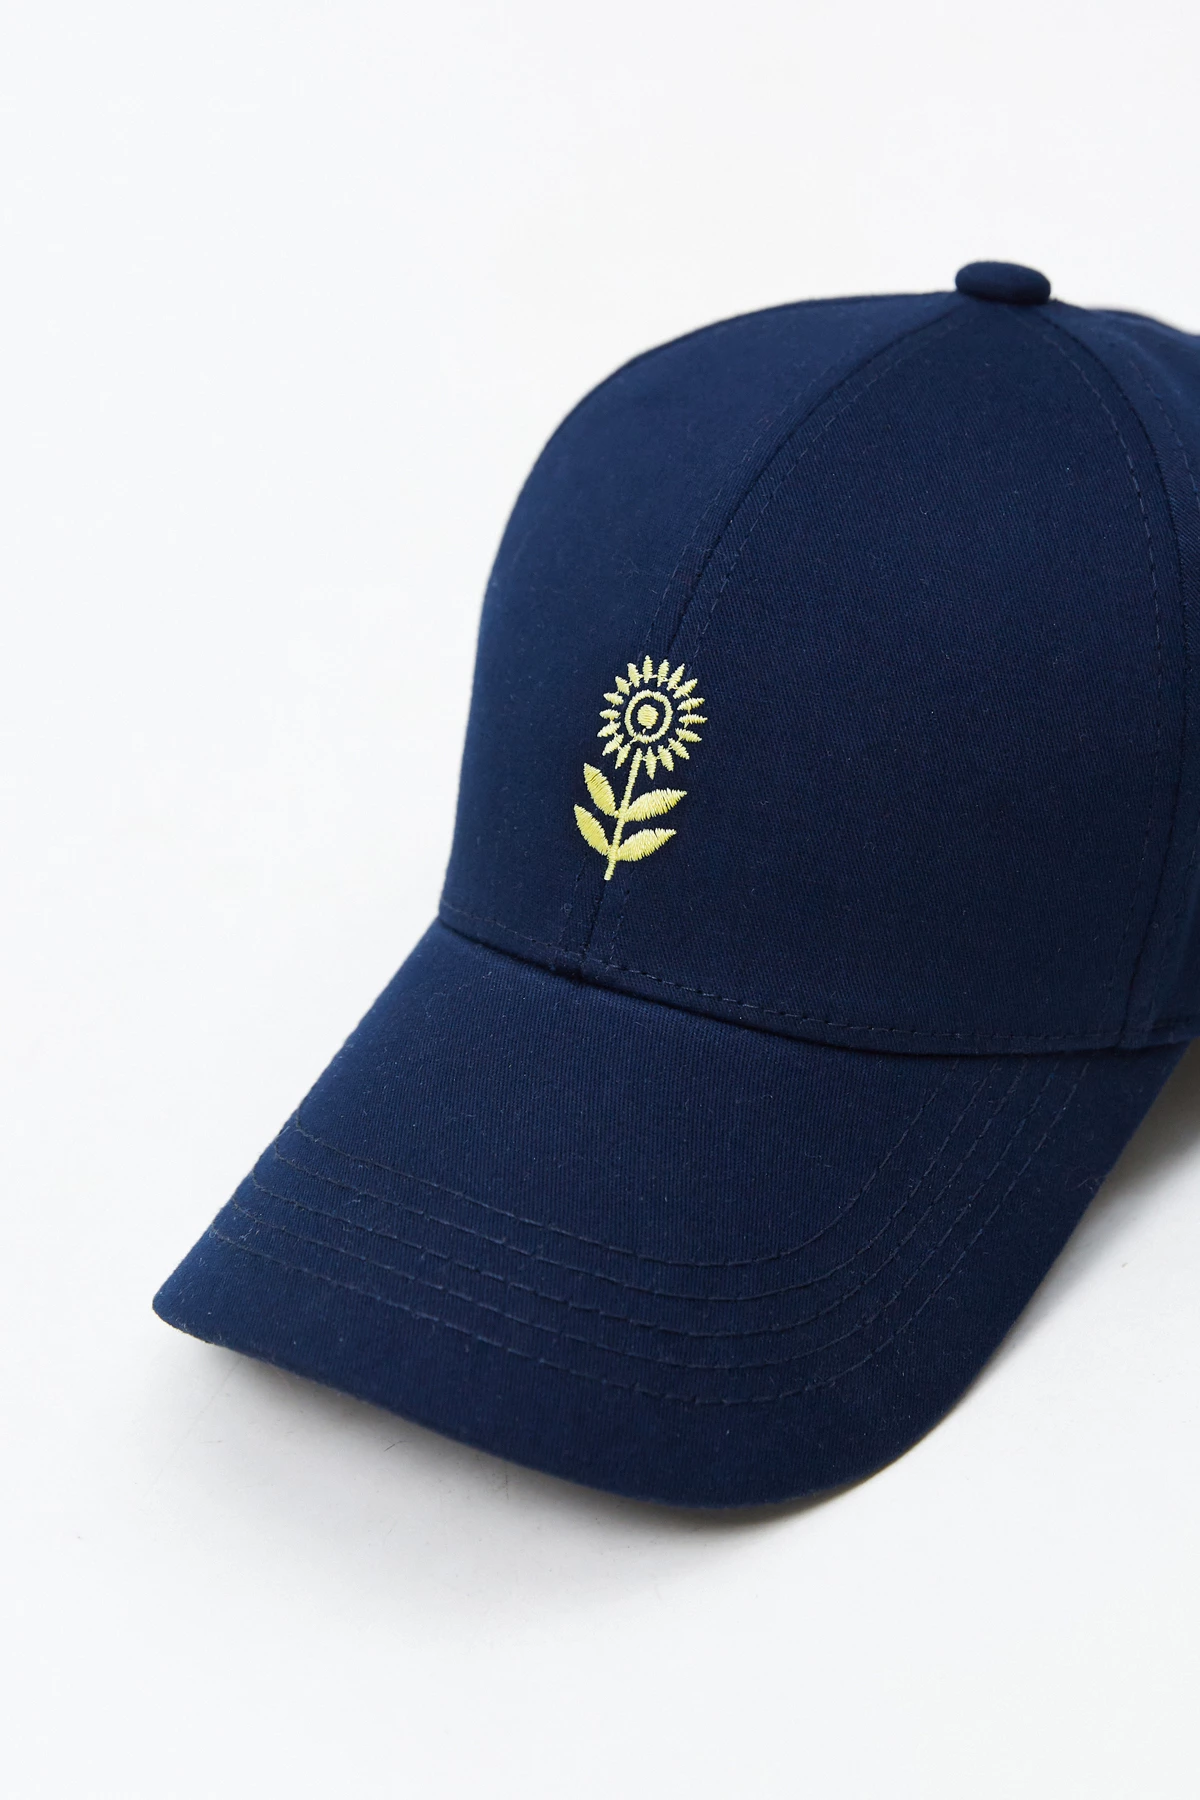 Navy blue cotton cap with "Sunflower" embroidery, photo 1